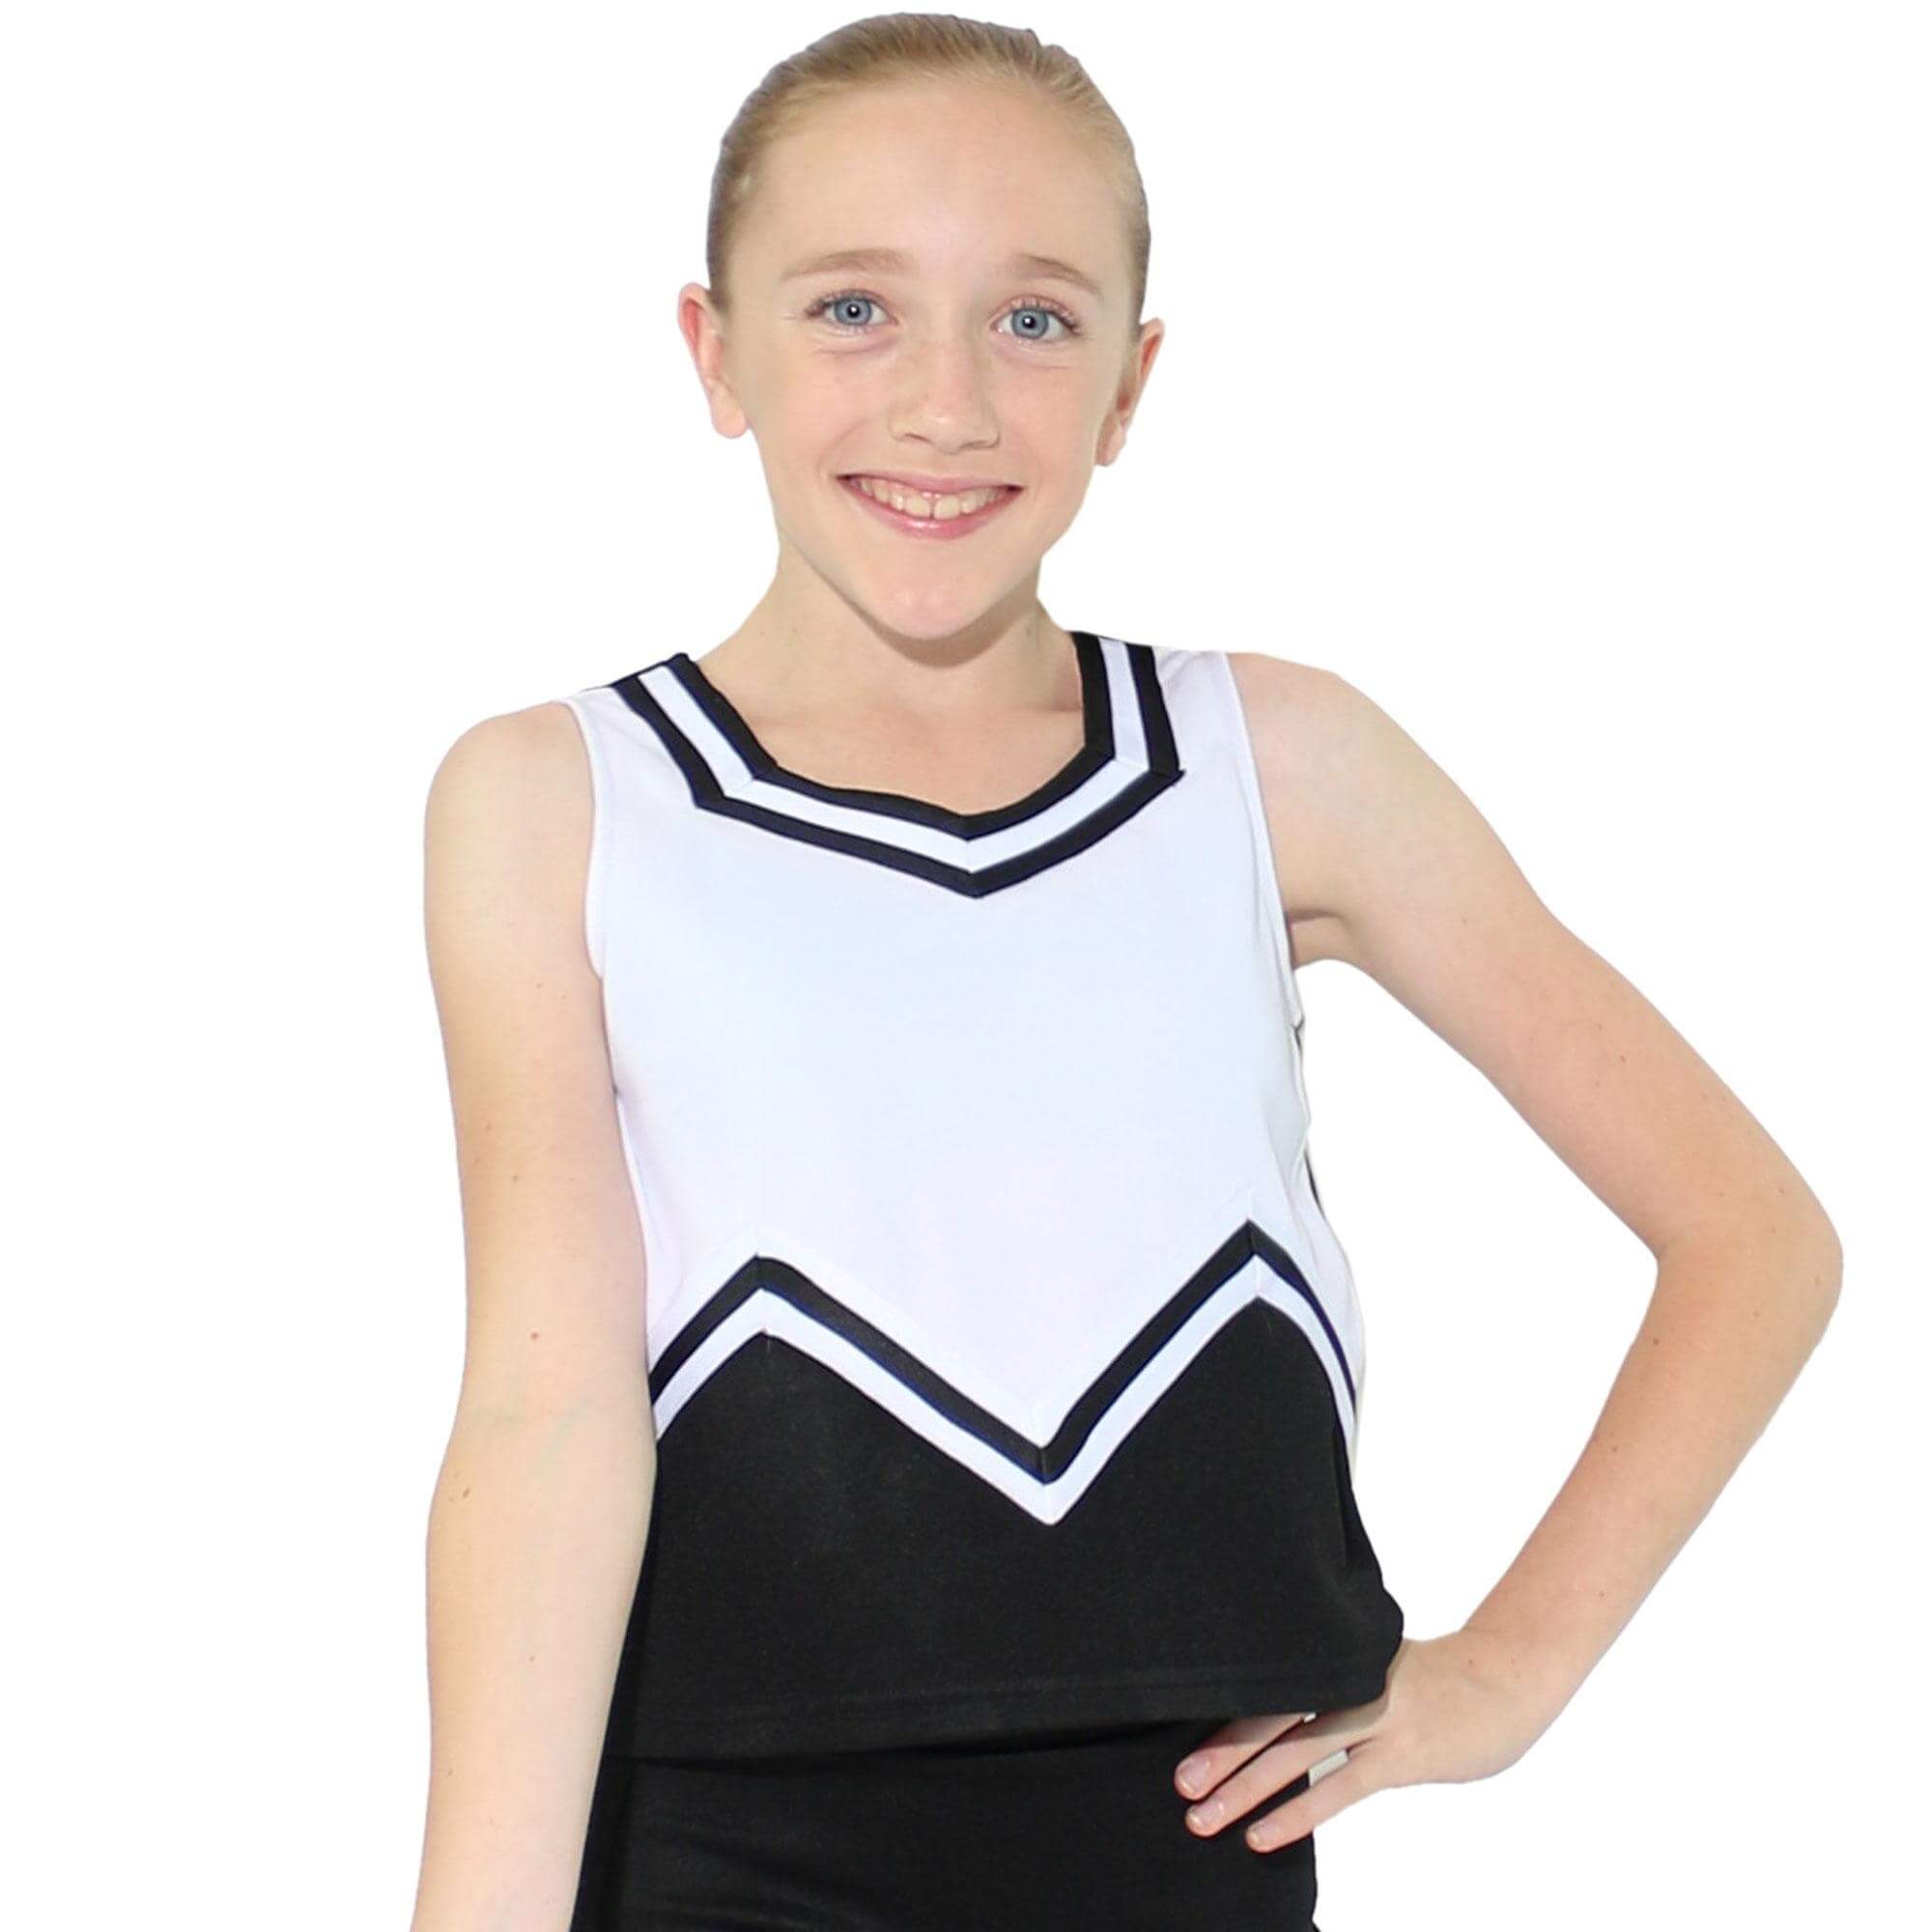 Danzcue Child M Sweetheart Cheerleaders Uniform Shell Top - Click Image to Close